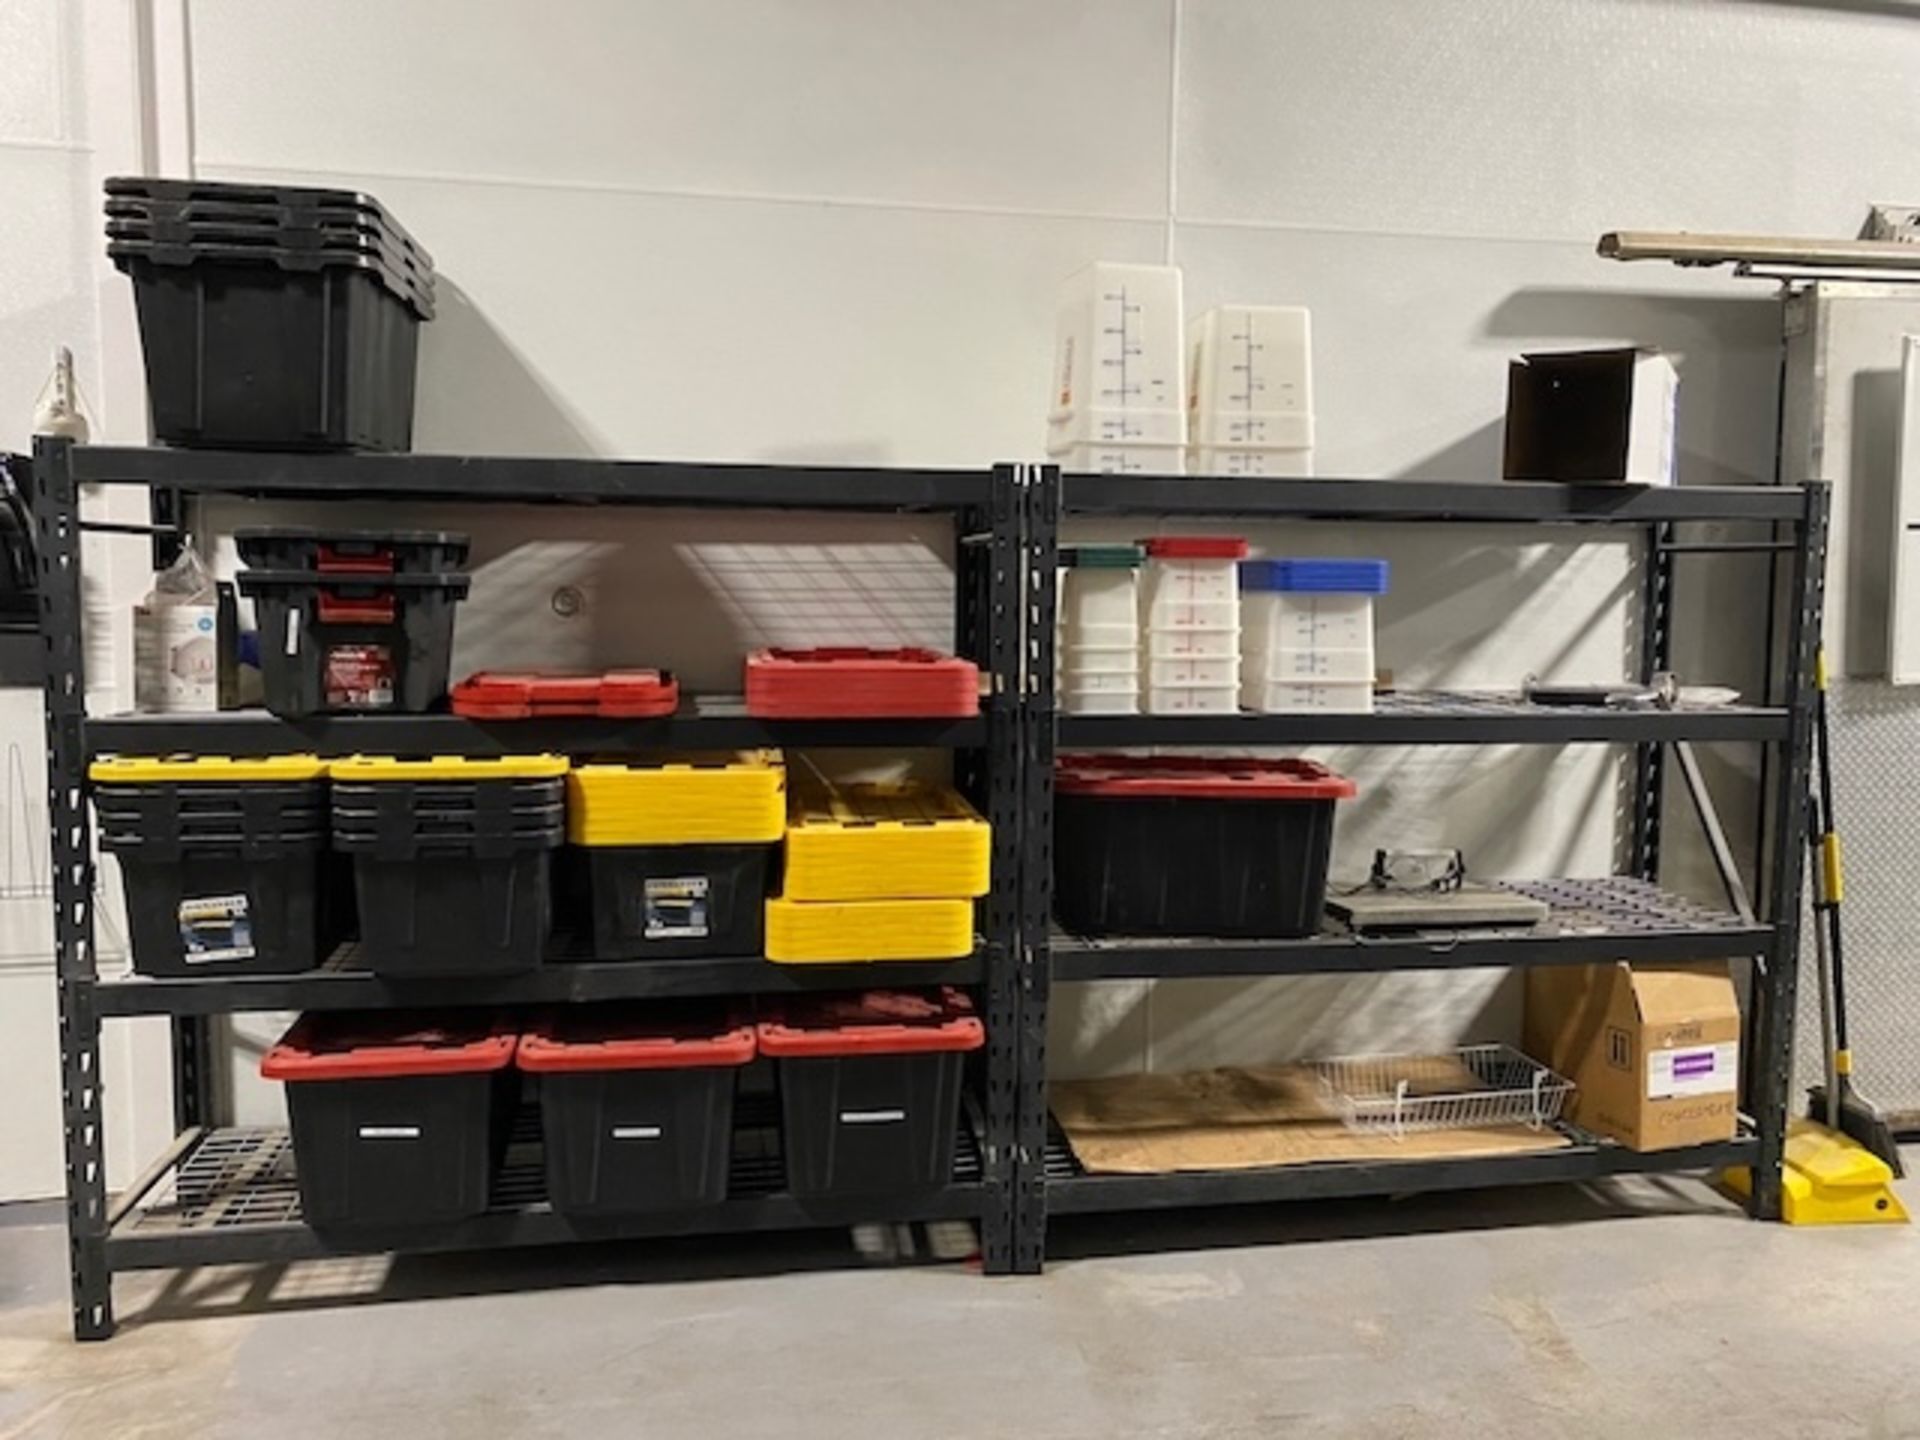 (2) Metal Shelving Units 24"'X77"X72" with Assorted Rubbermaid Bins | Rig Fee $100